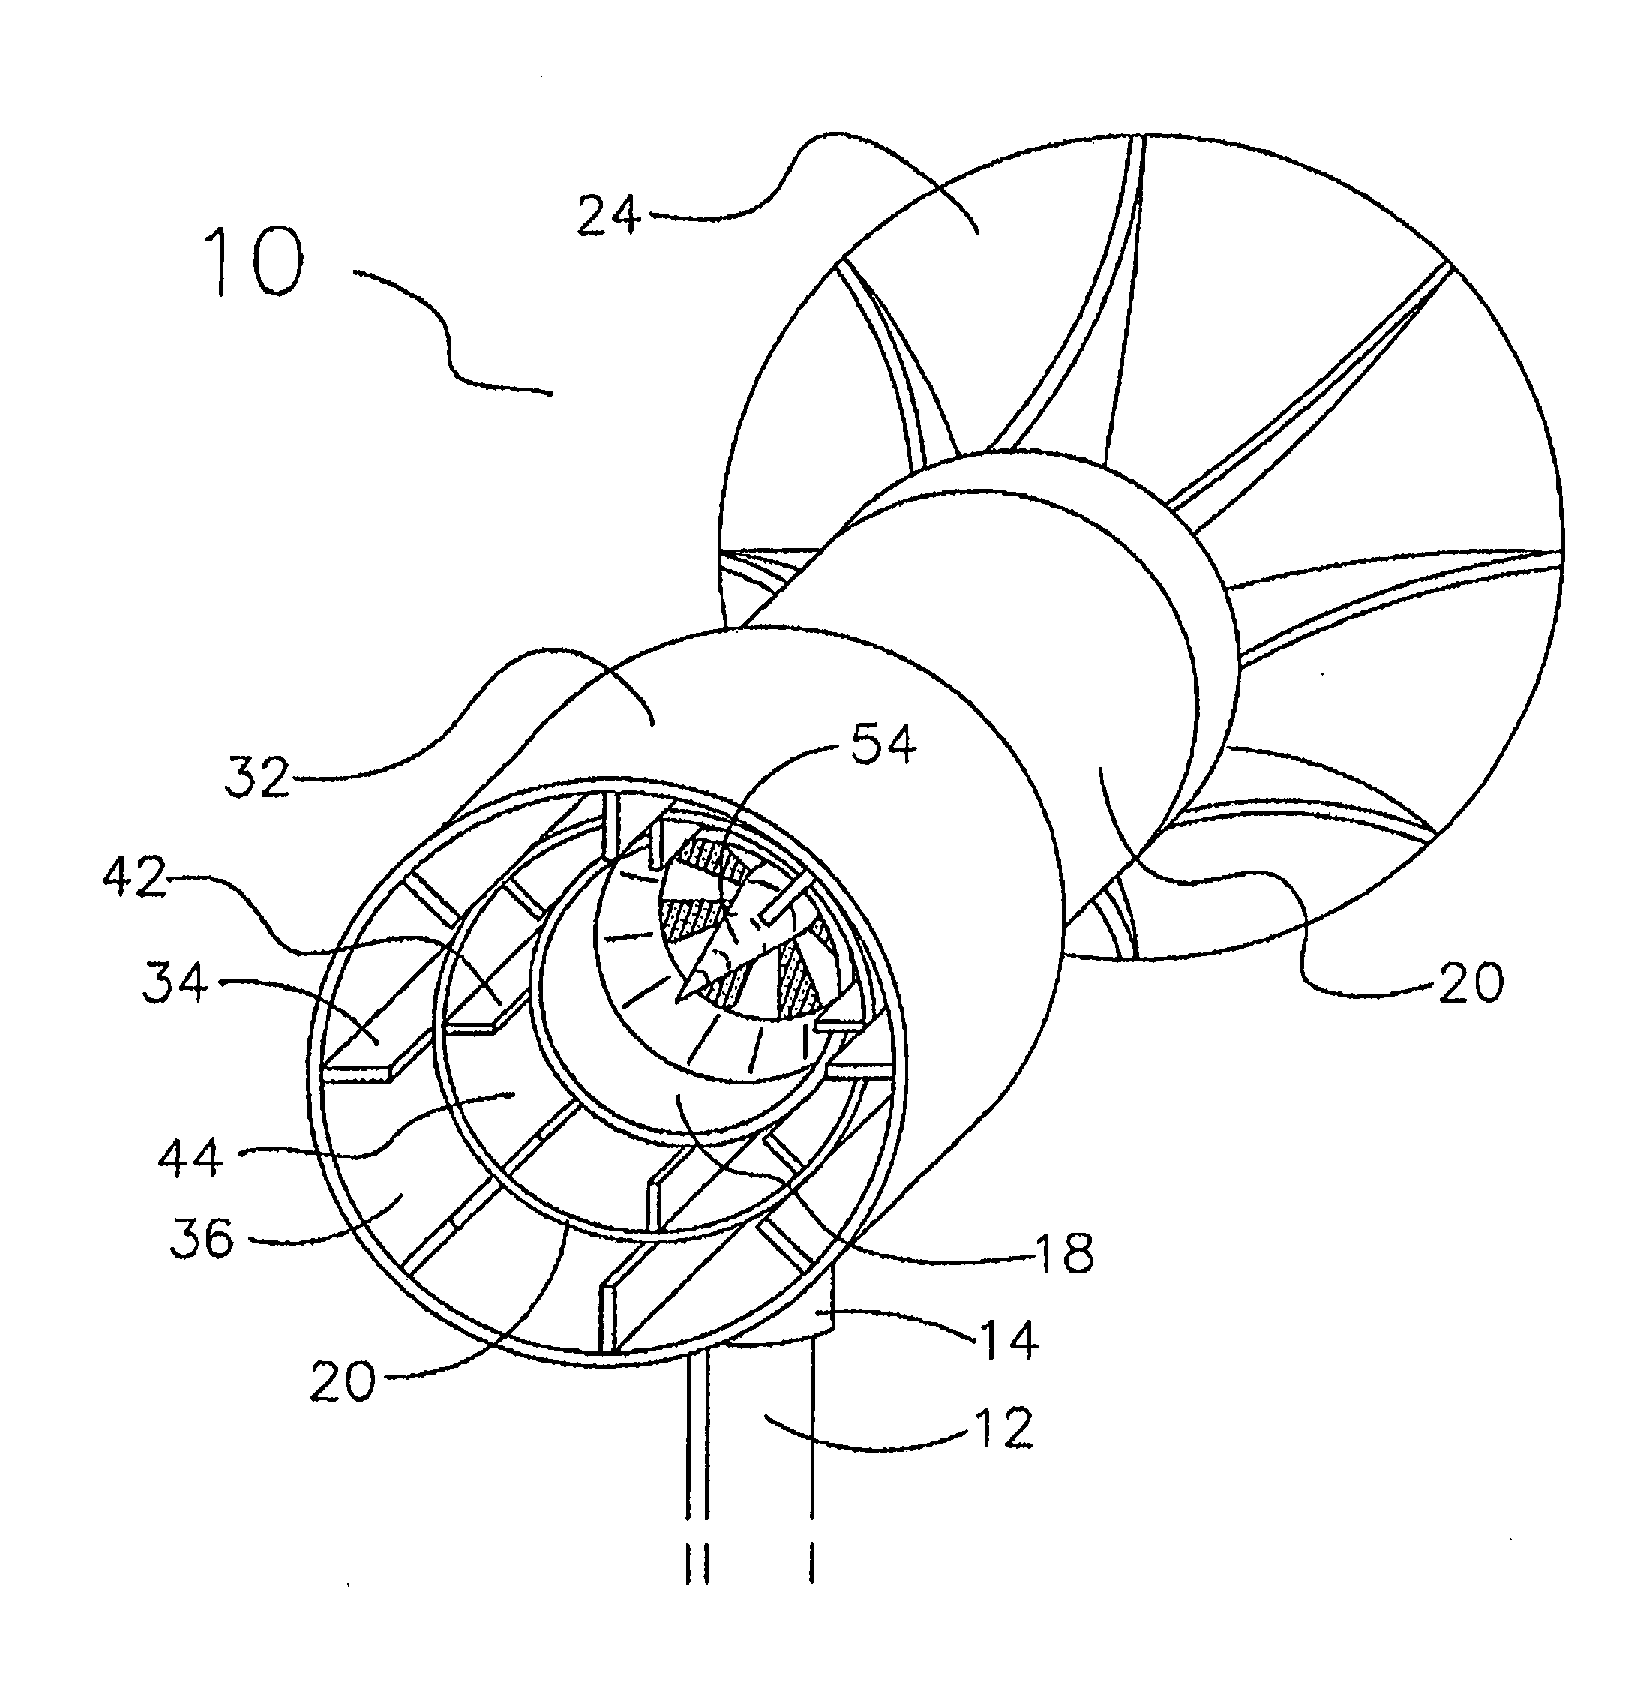 Wind turbine with different size blades for a diffuser augmented wind turbine assembly